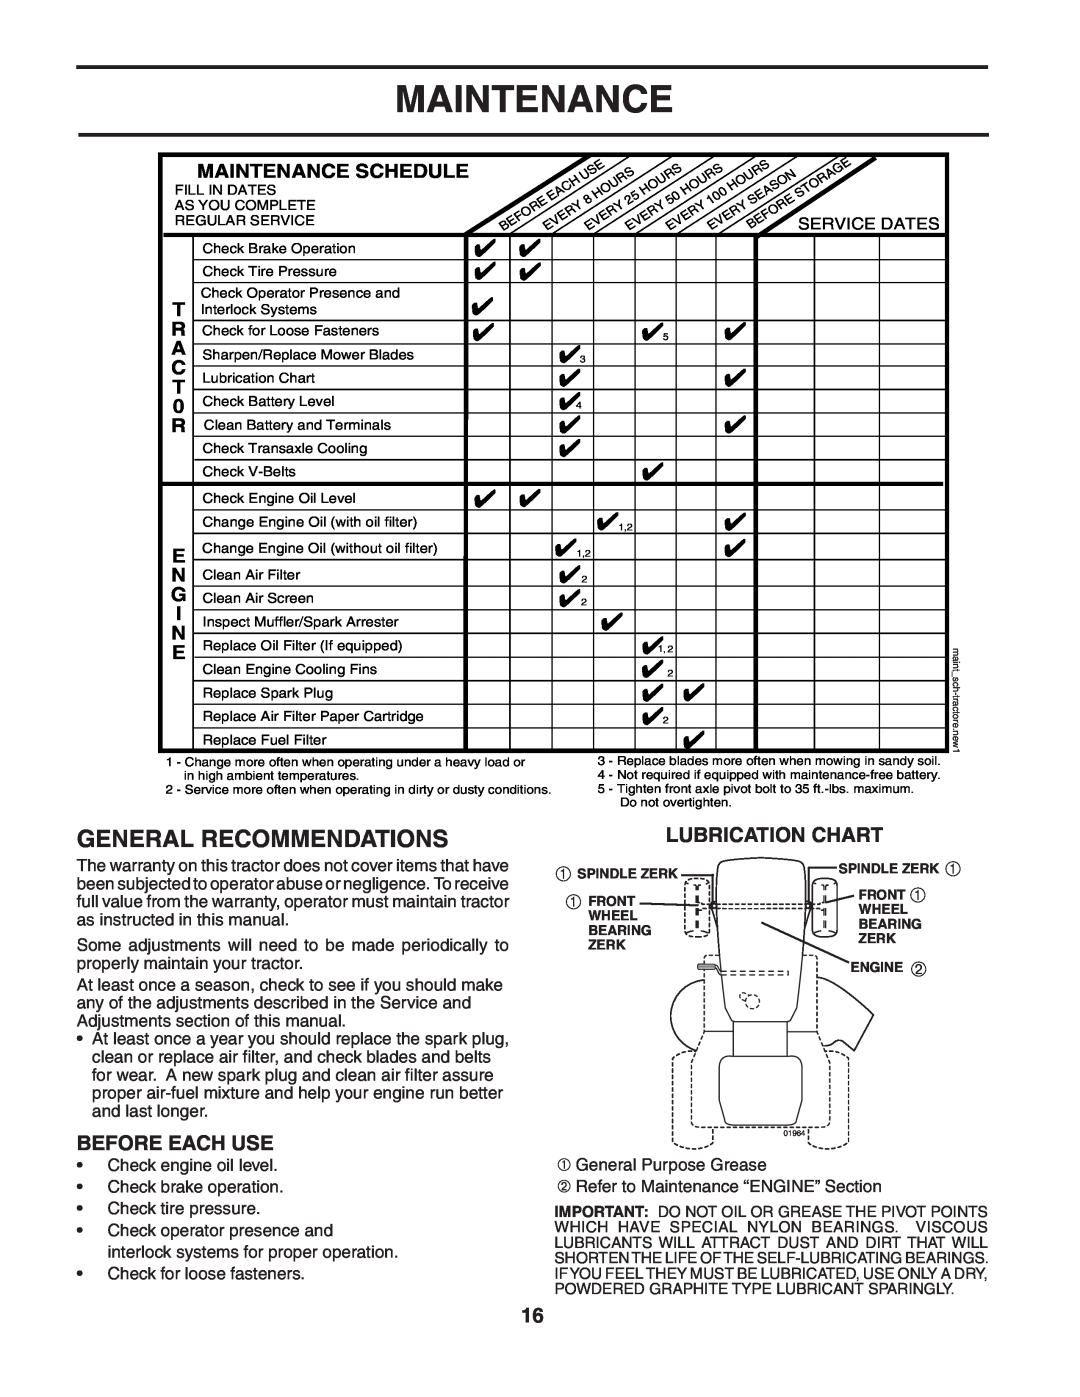 Husqvarna YTH2548 owner manual General Recommendations, Before Each Use, Lubrication Chart, Maintenance Schedule 